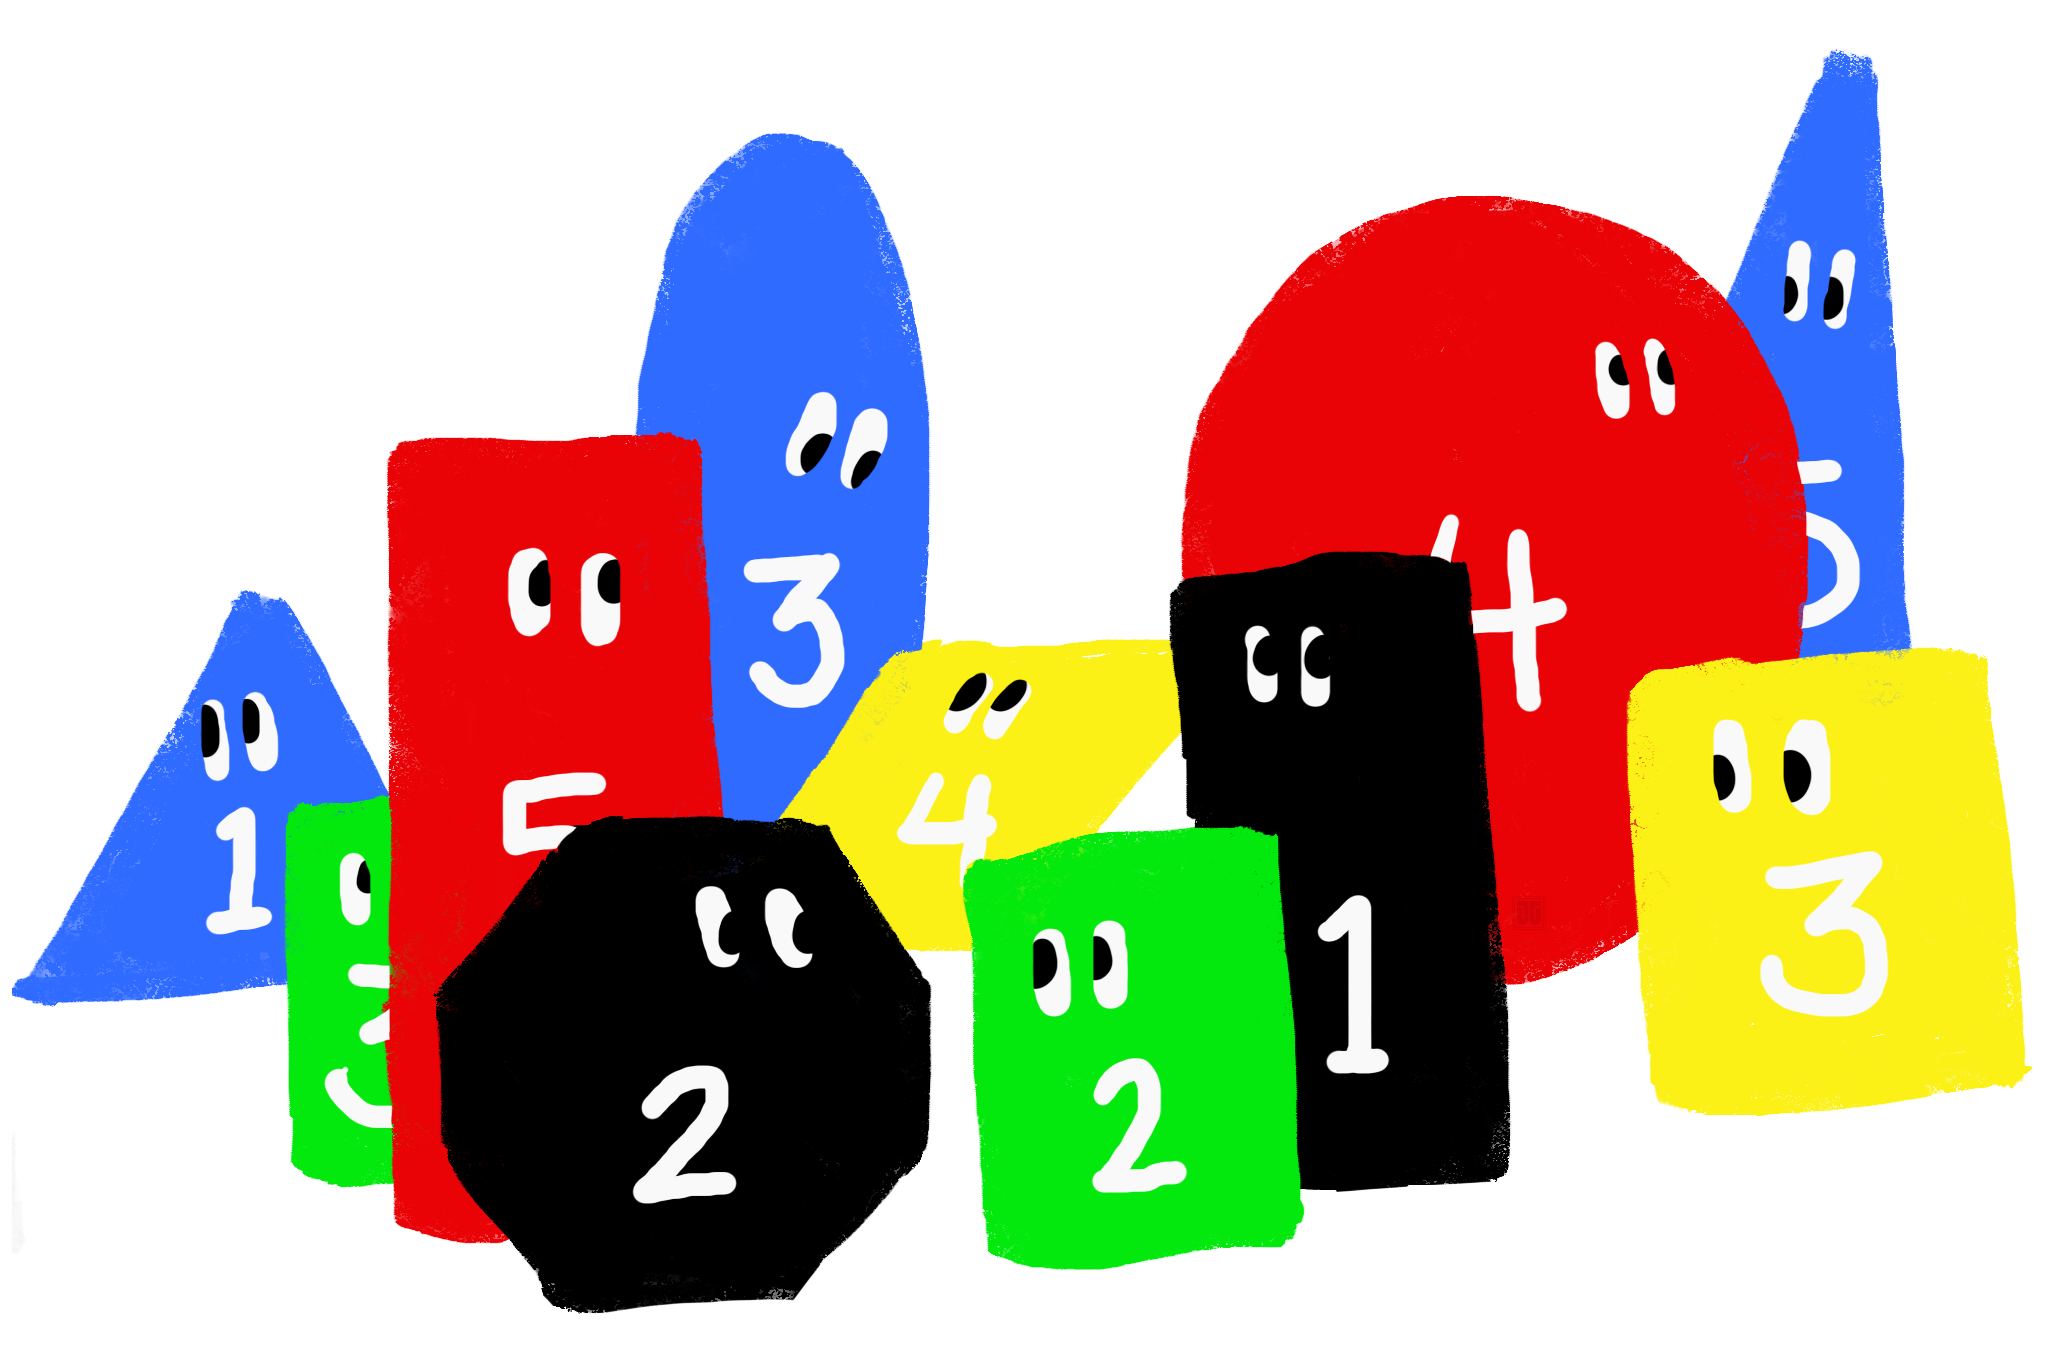 Various colored and numbered shapes.